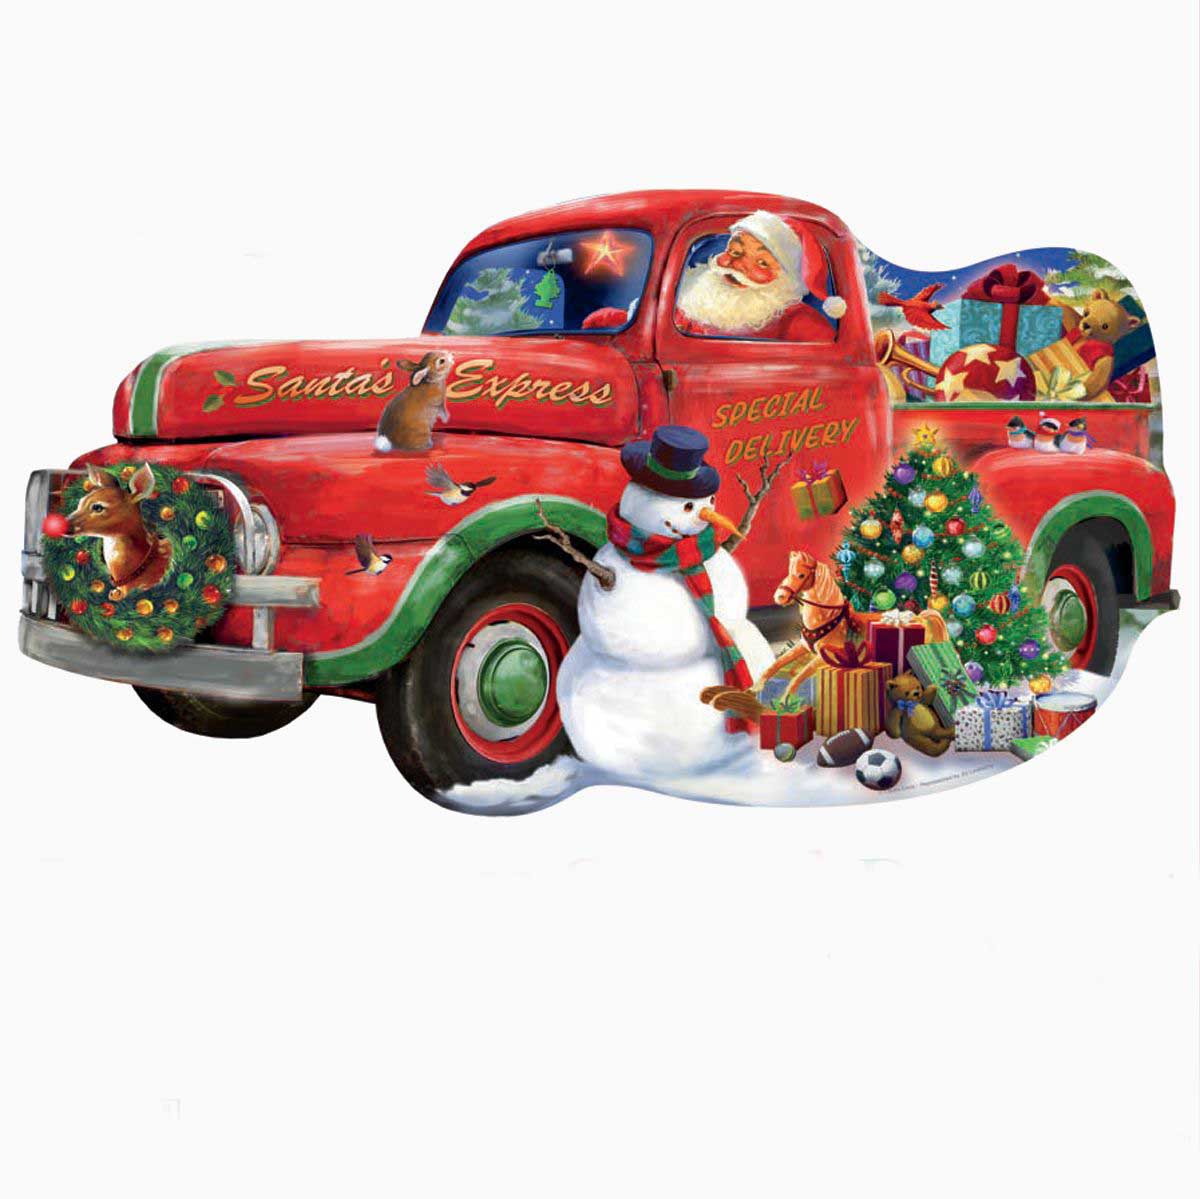 Santa Express Special Delivery Car Shaped Puzzle